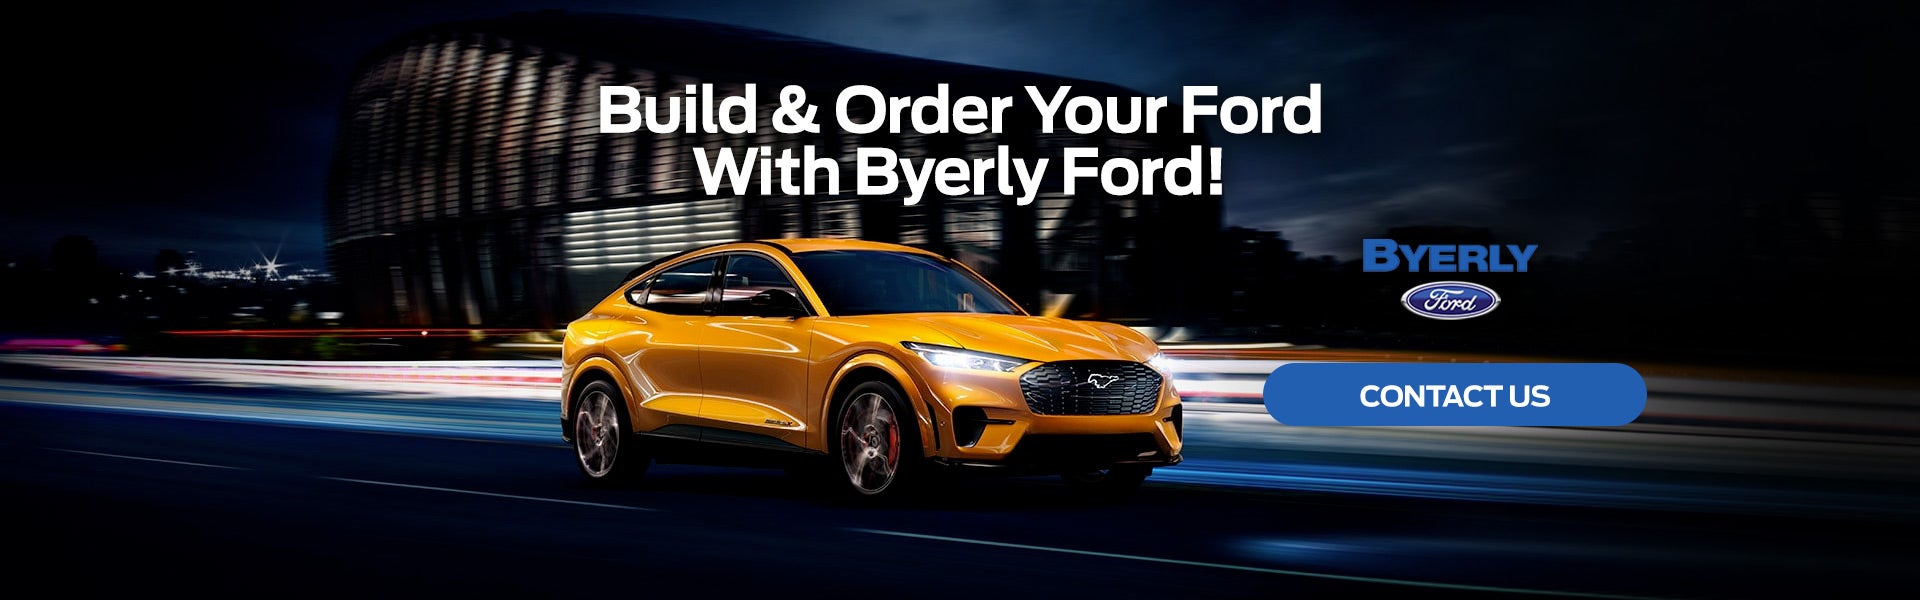 Build & Order Your Ford With Byerly Ford!